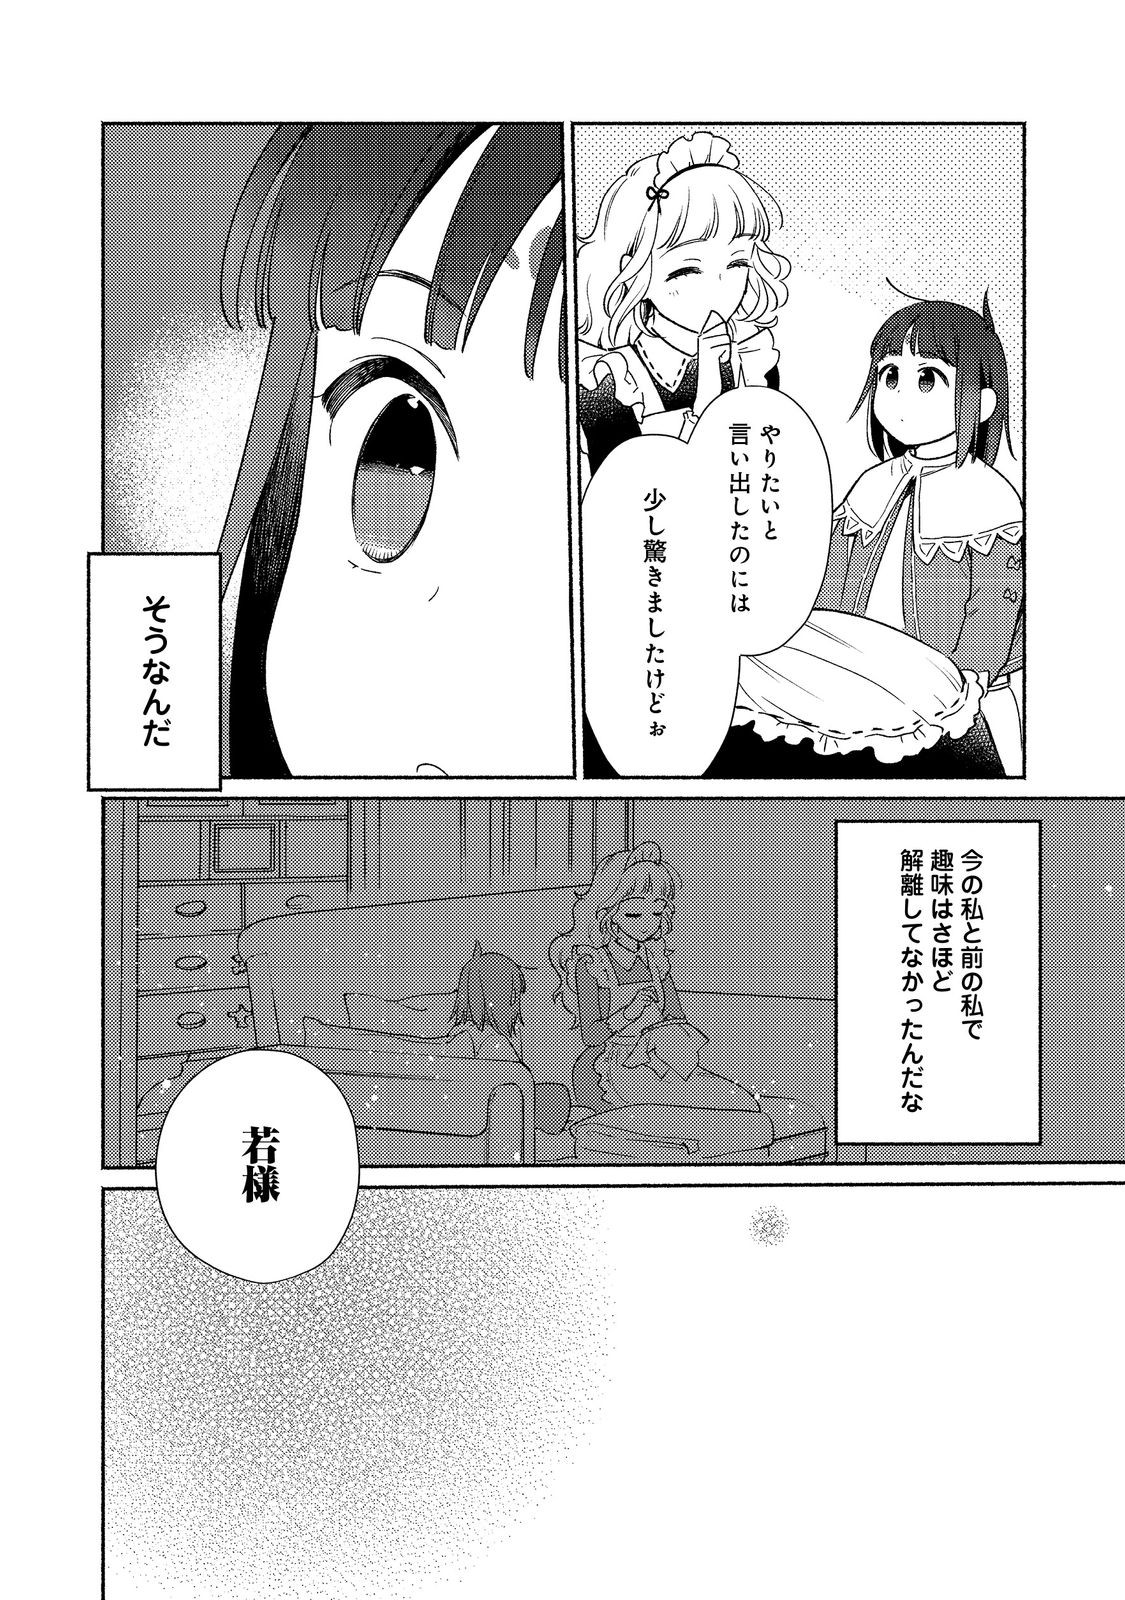 I’m the White Pig Nobleman 第21.2話 - Page 8